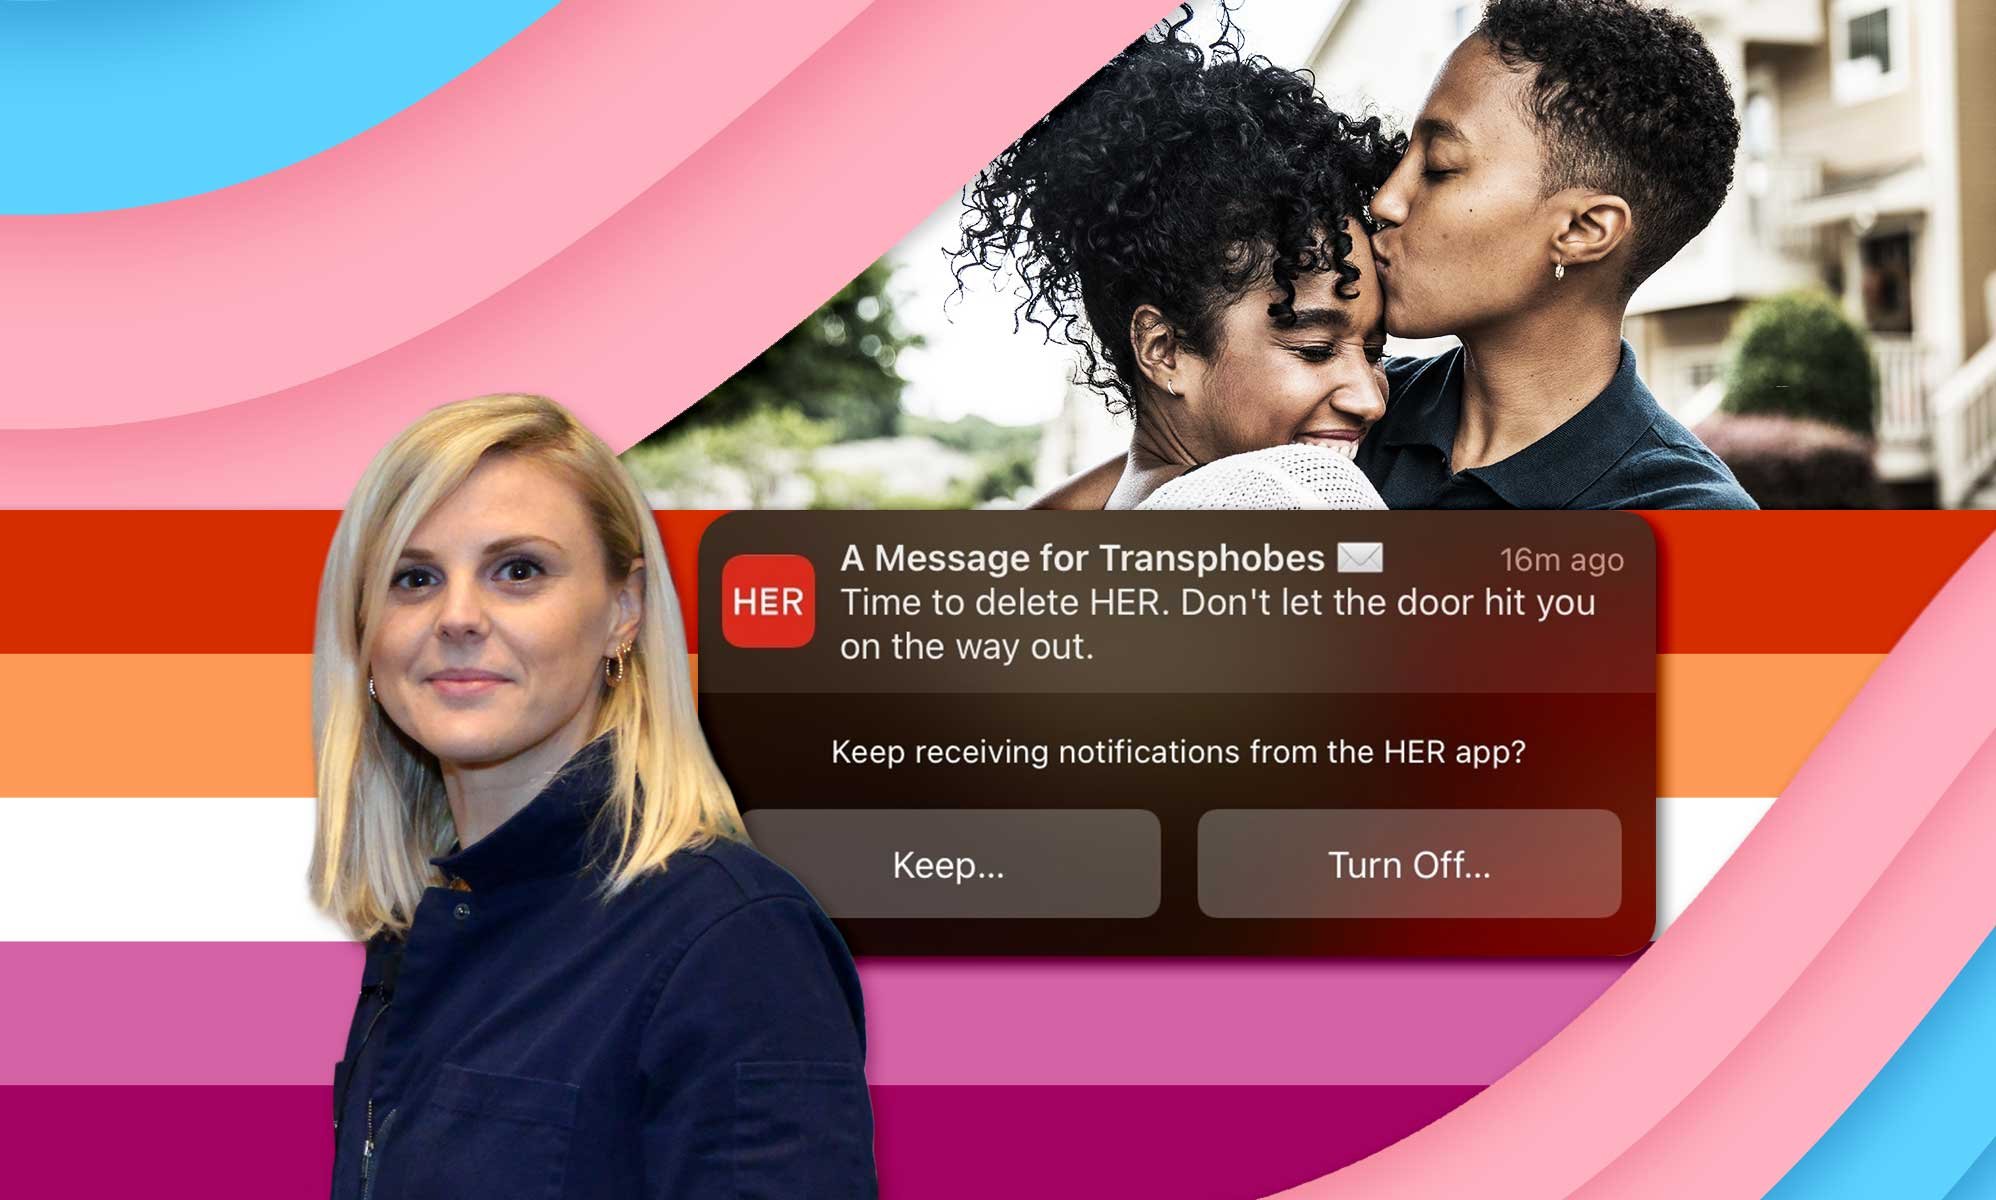 Lesbian dating app HER tells all transphobic users to delete their accounts